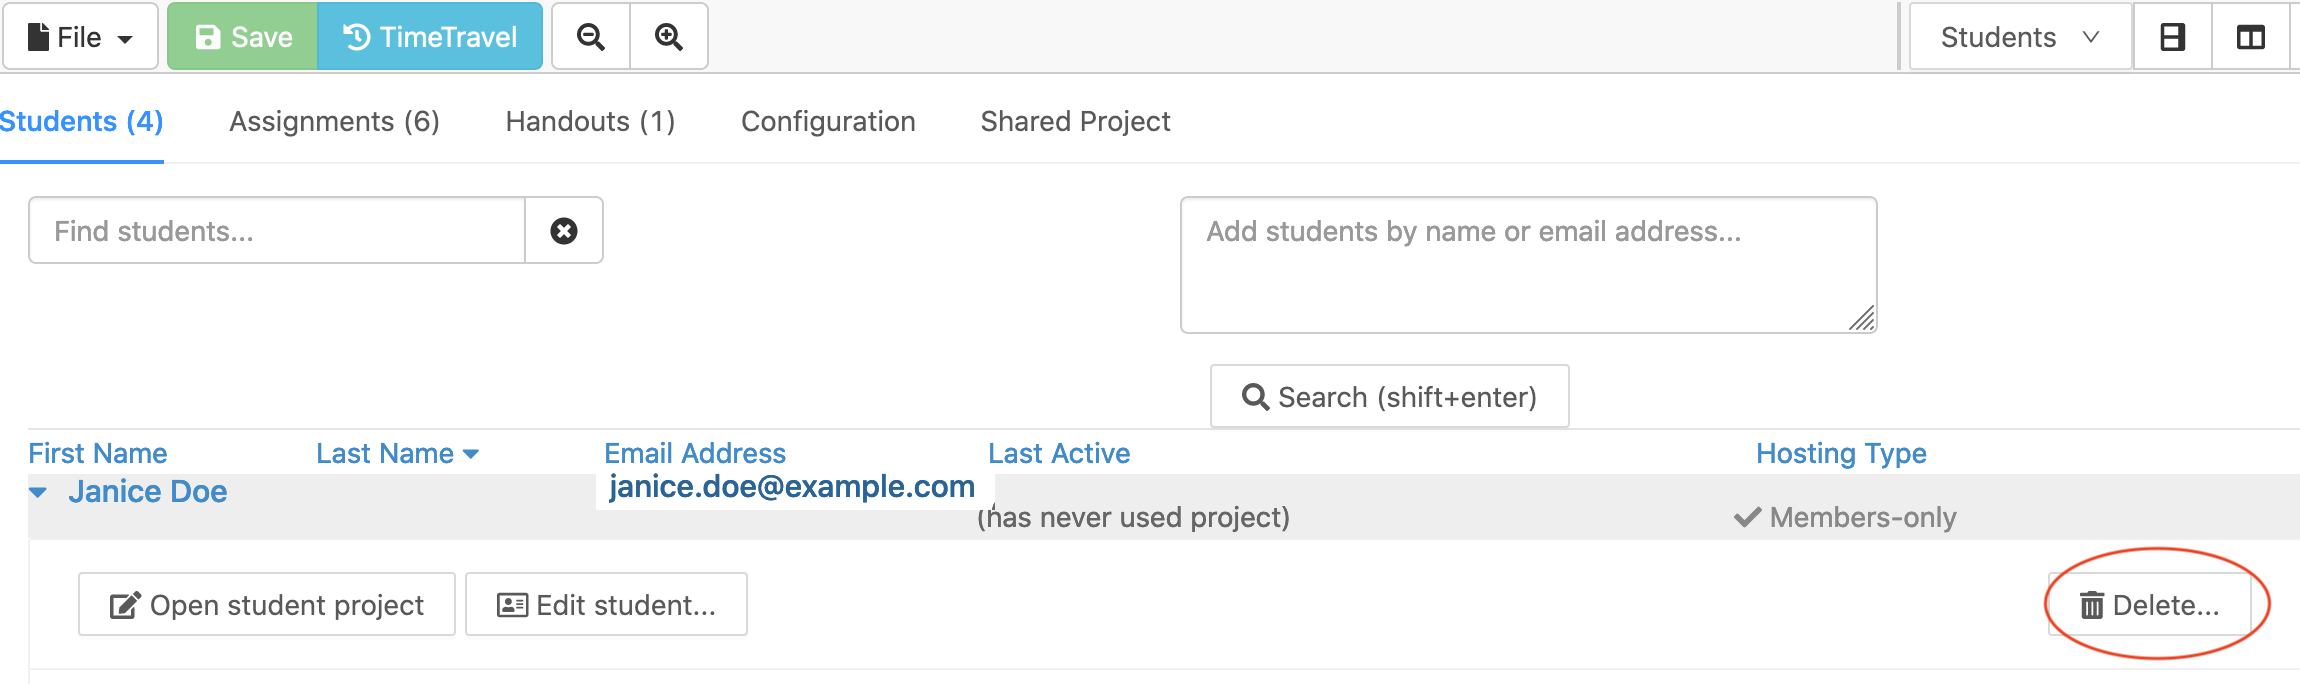 Delete student button is in expanded student entry at right